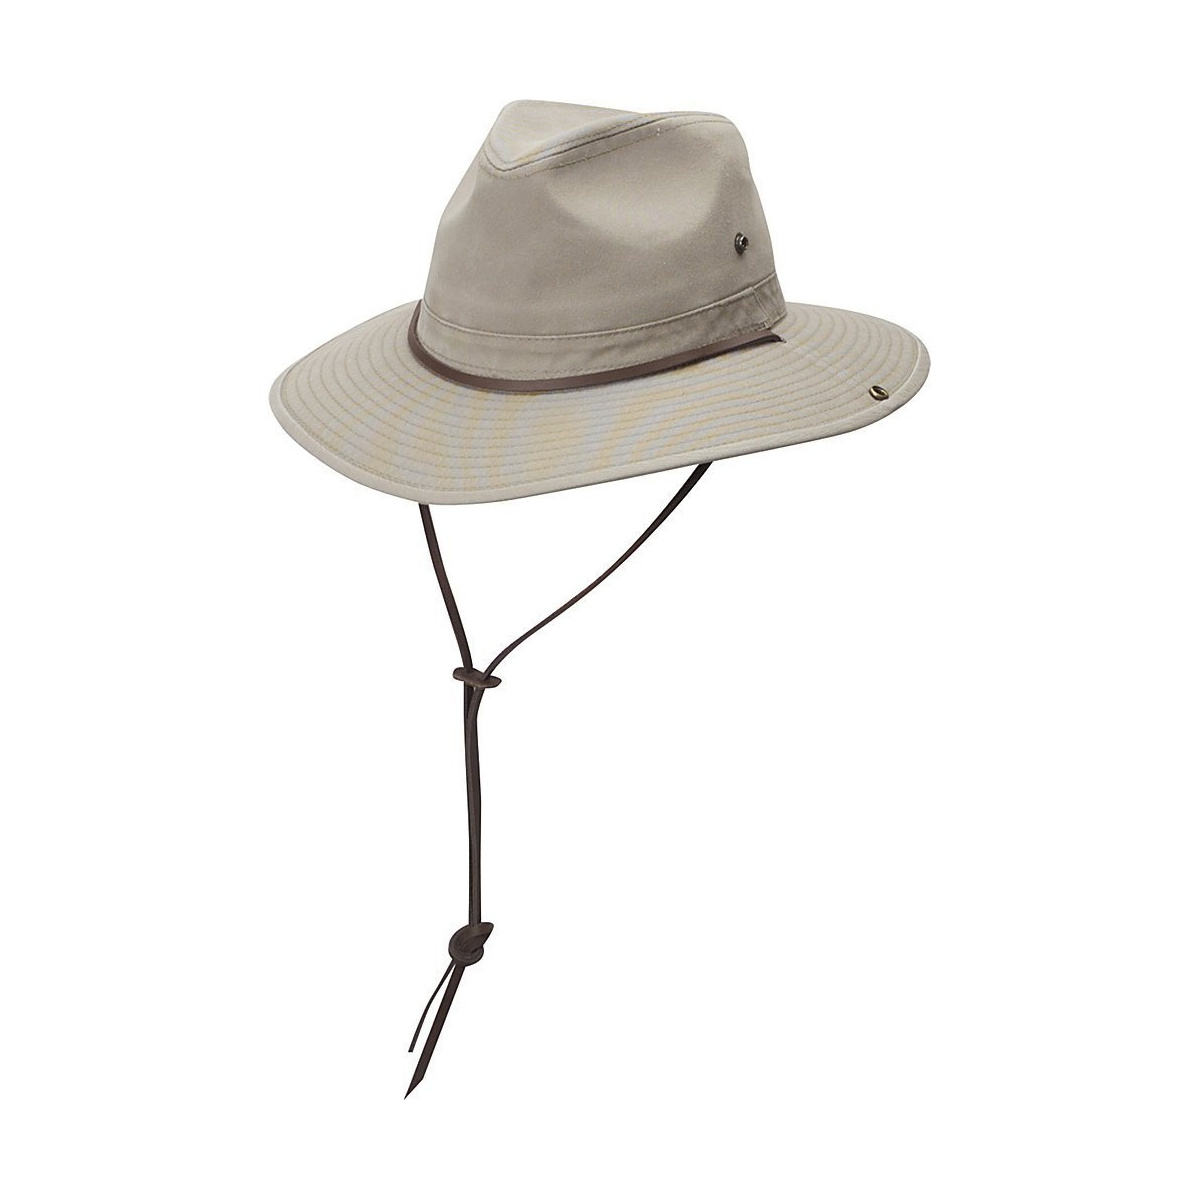 Djibouti safari hat - fabric hat Reference : 229 | Chapellerie Traclet